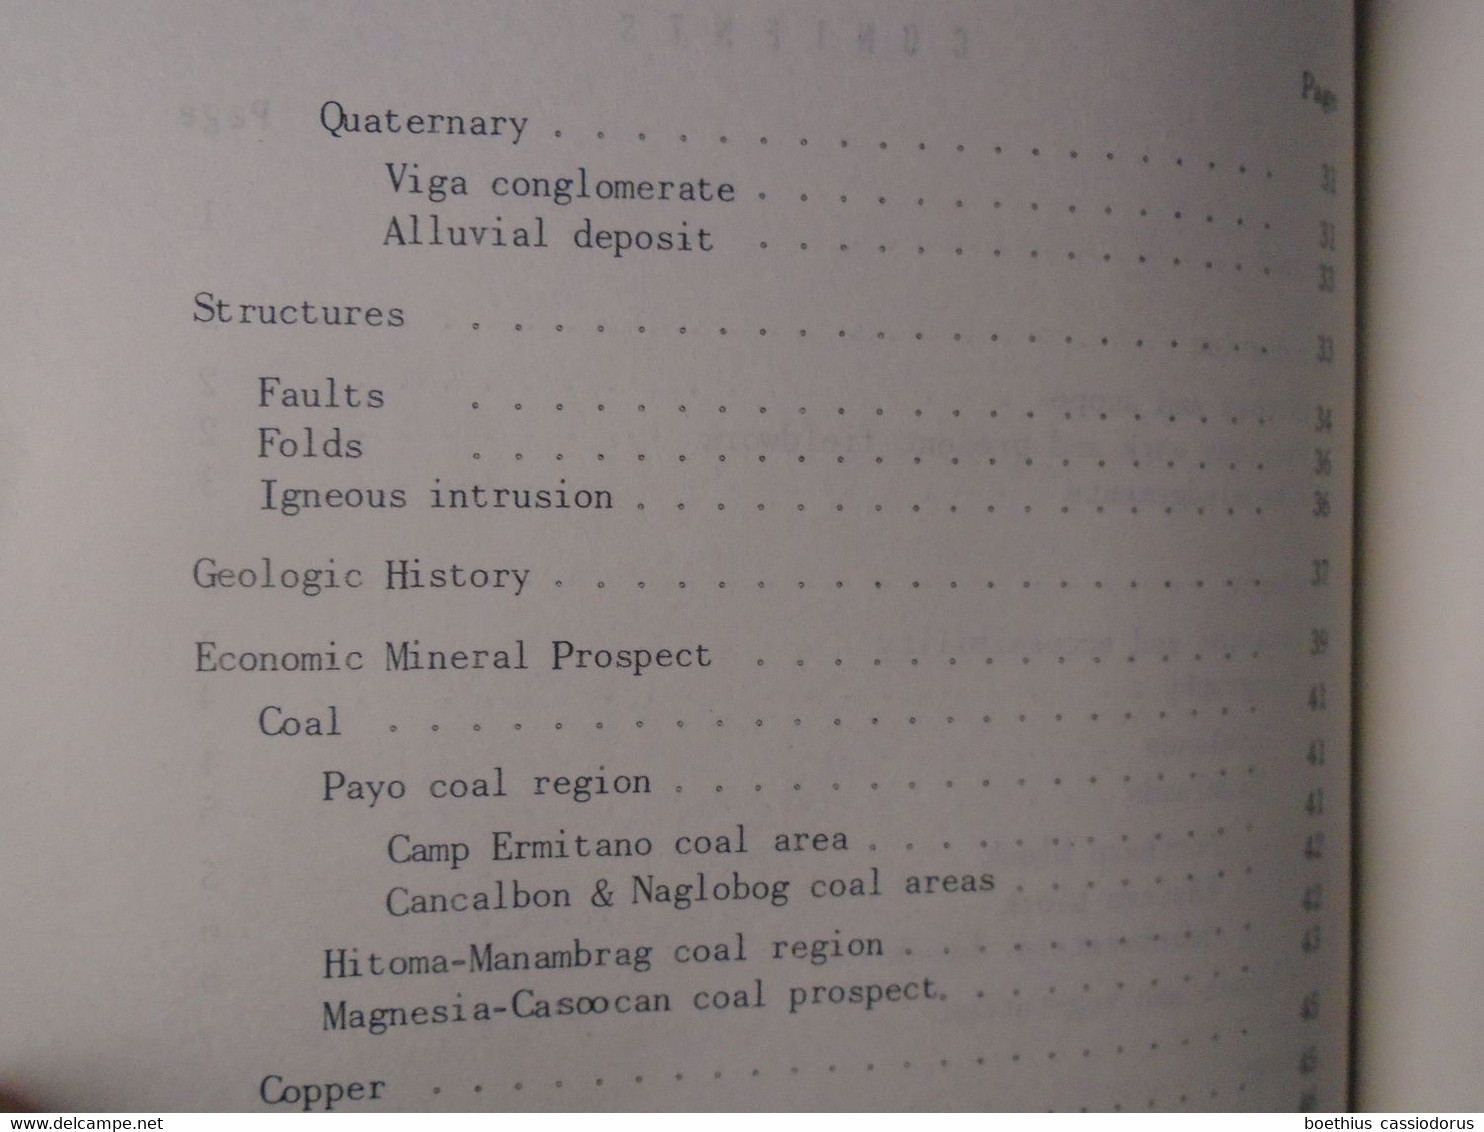 THE GEOLOGY AND MINERAL RESOURCES OF CATANDUANES PROVINCE BY FEDERICO E. MIRANDA & BASSANIO S. VARGAS 1967 PHILIPPINES - Scienze Della Terra